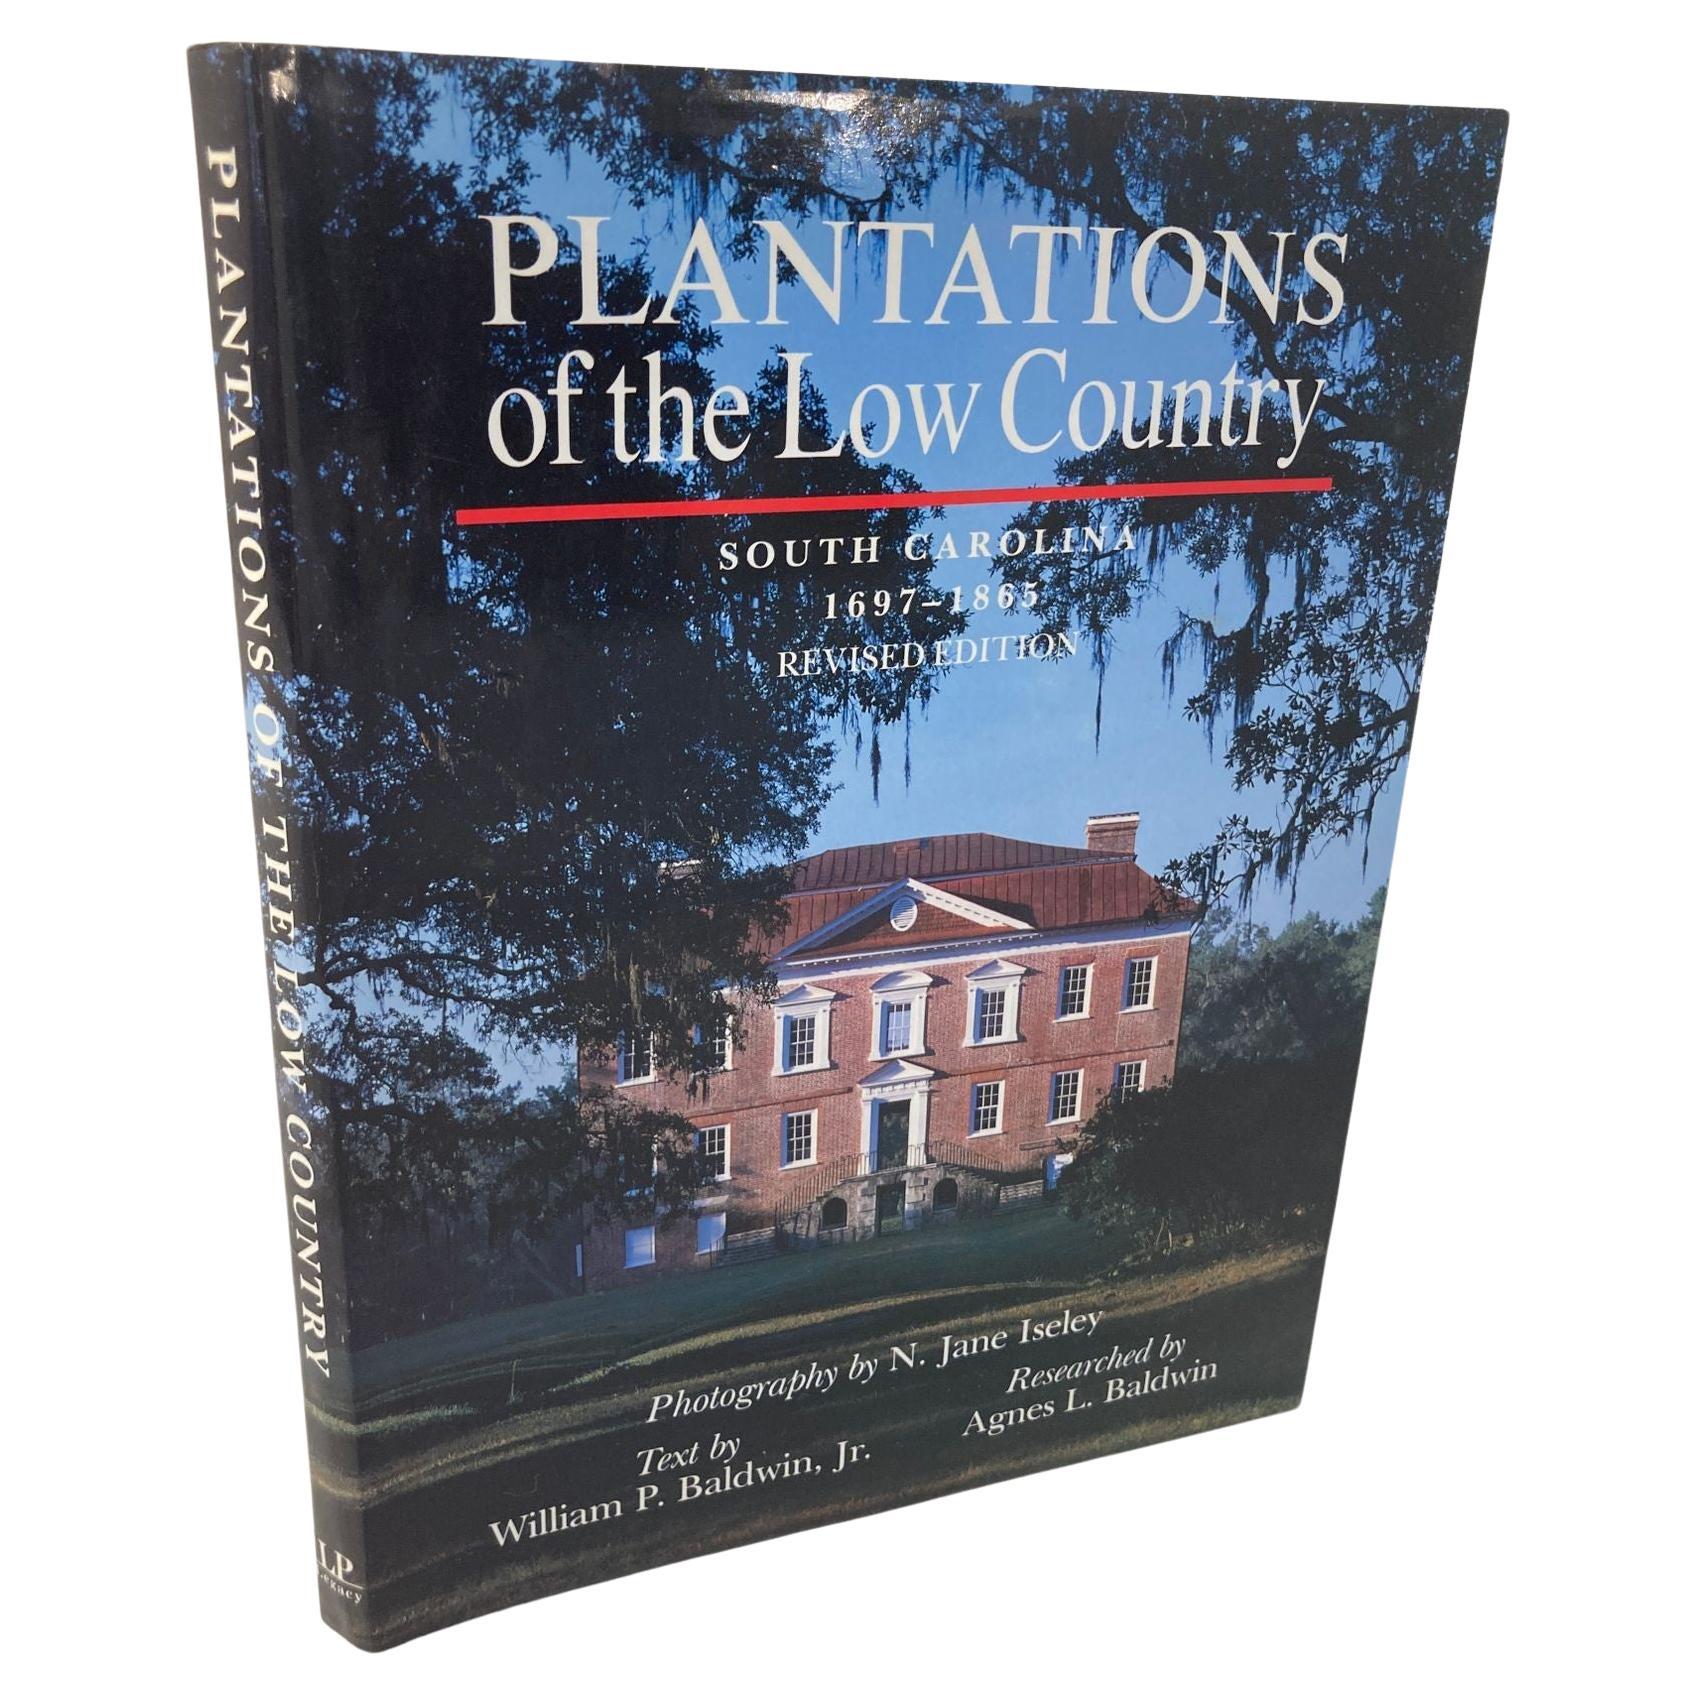 Plantations of the Low Country, South Carolina 1697-1865 Hardcover Book